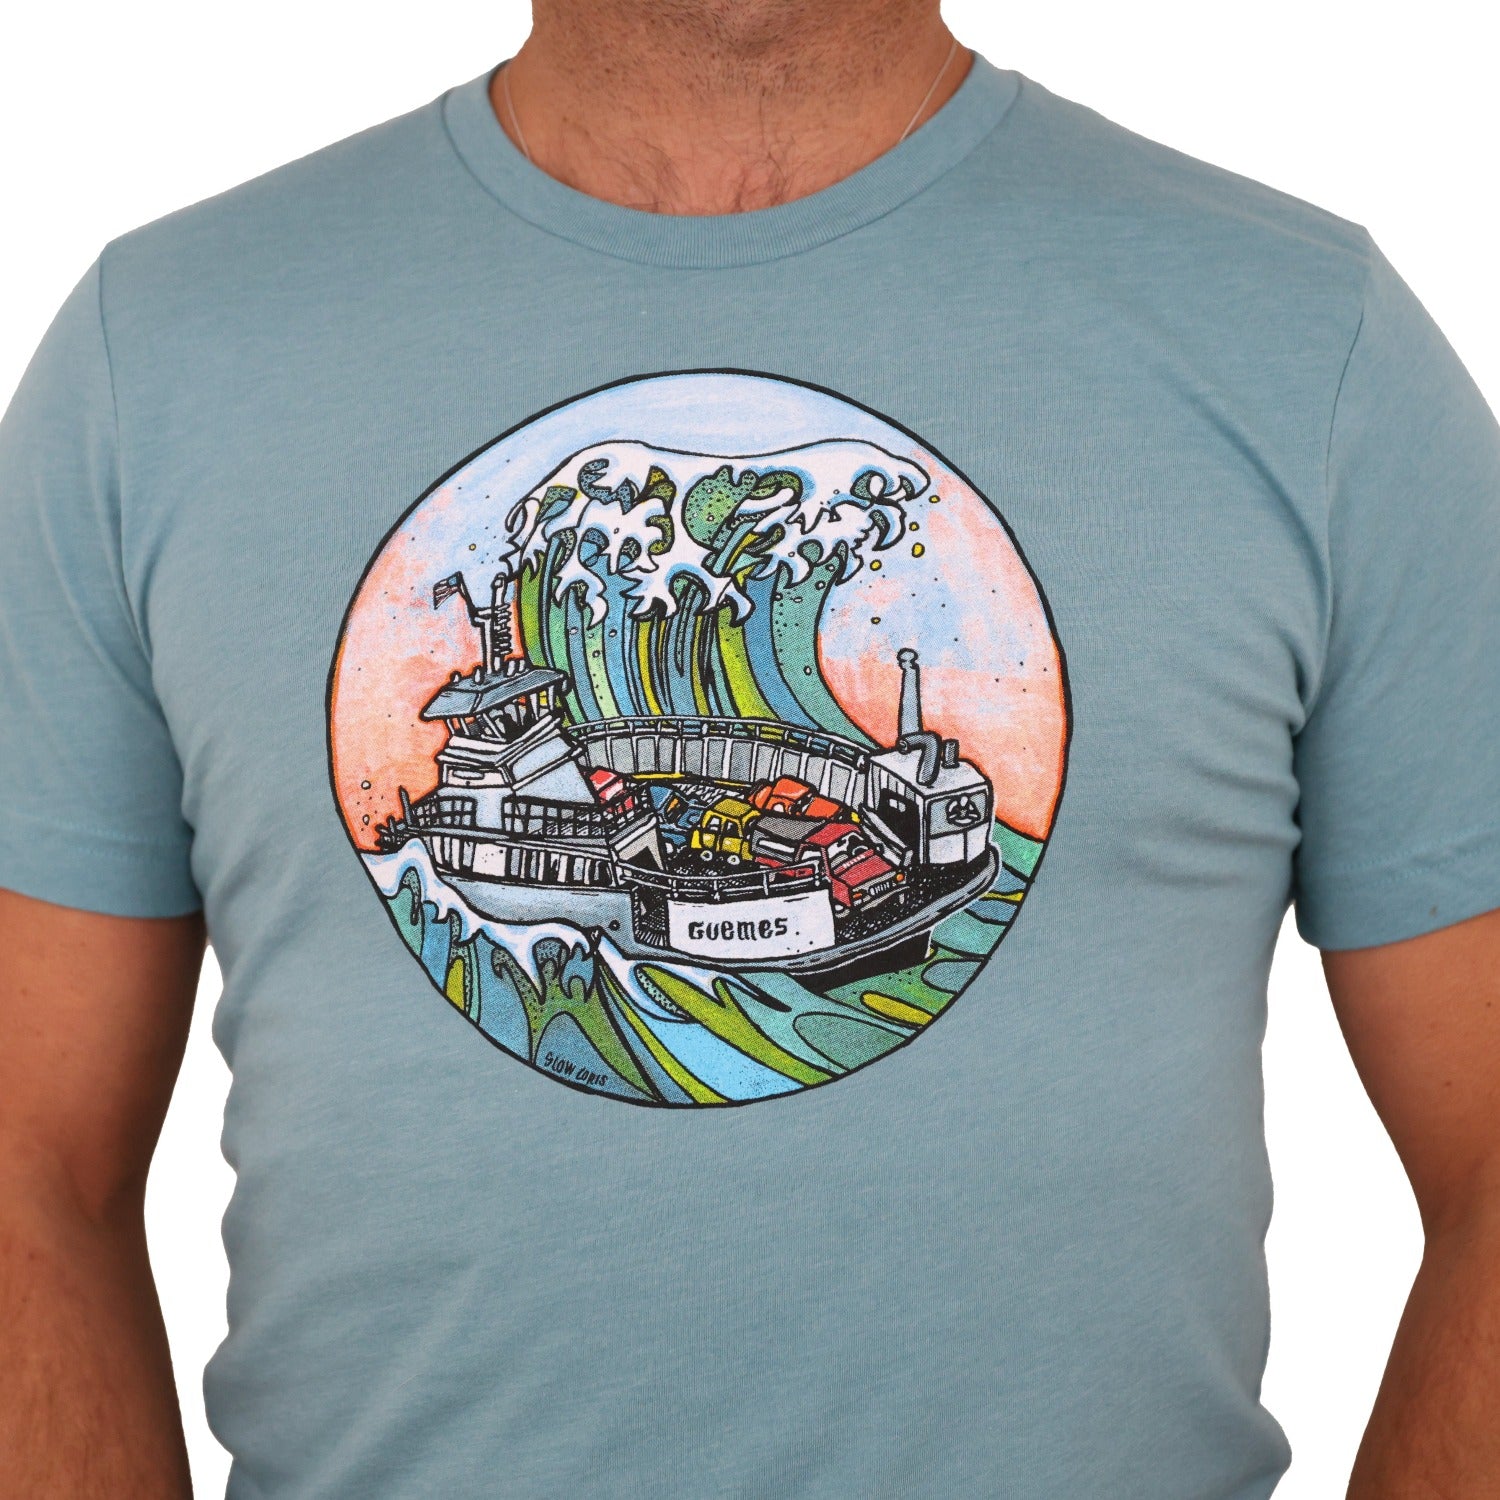 man wearing a light blue t-shirt with a screen print of a huge wave about to engulf the Guemes ferry